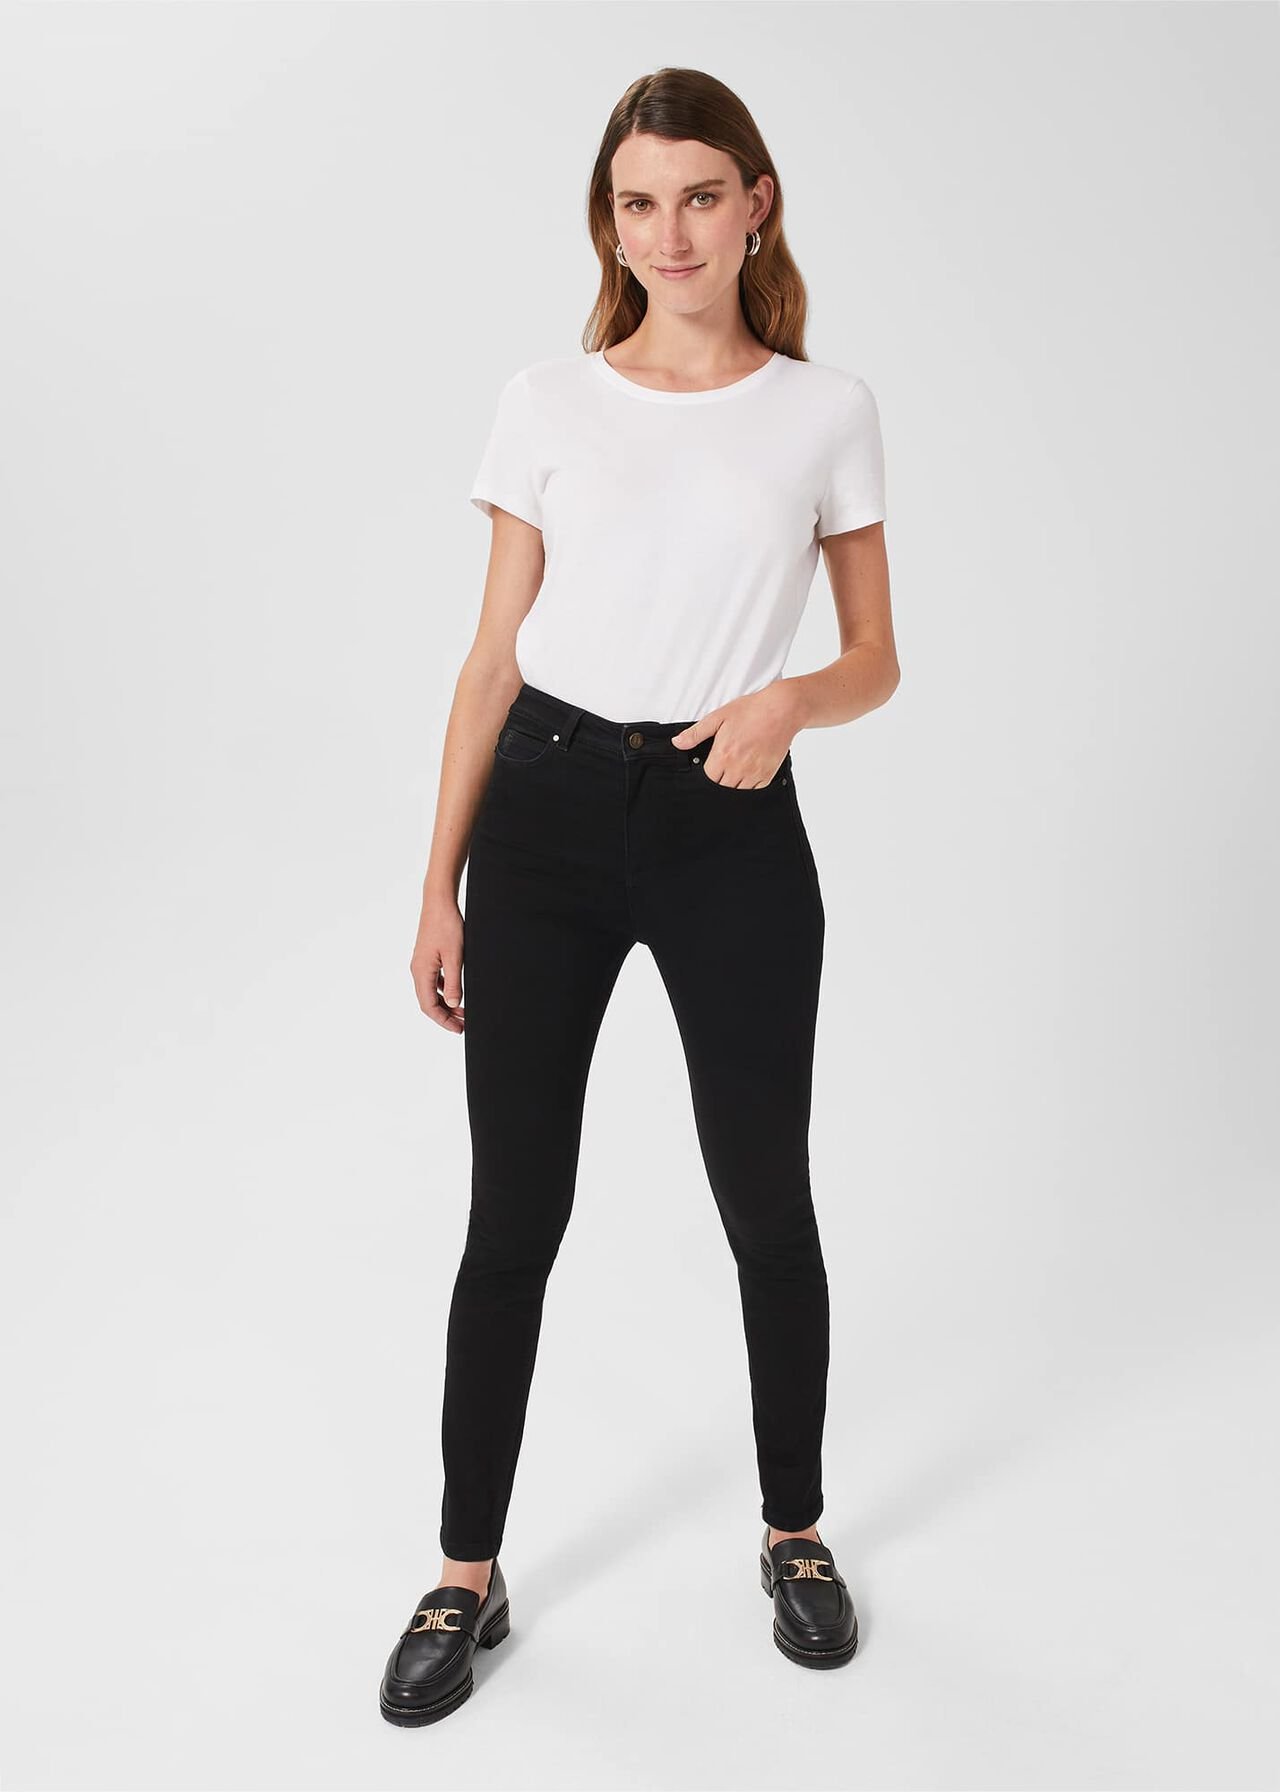 Gia Sculpting Jeans With Stretch , Black, hi-res